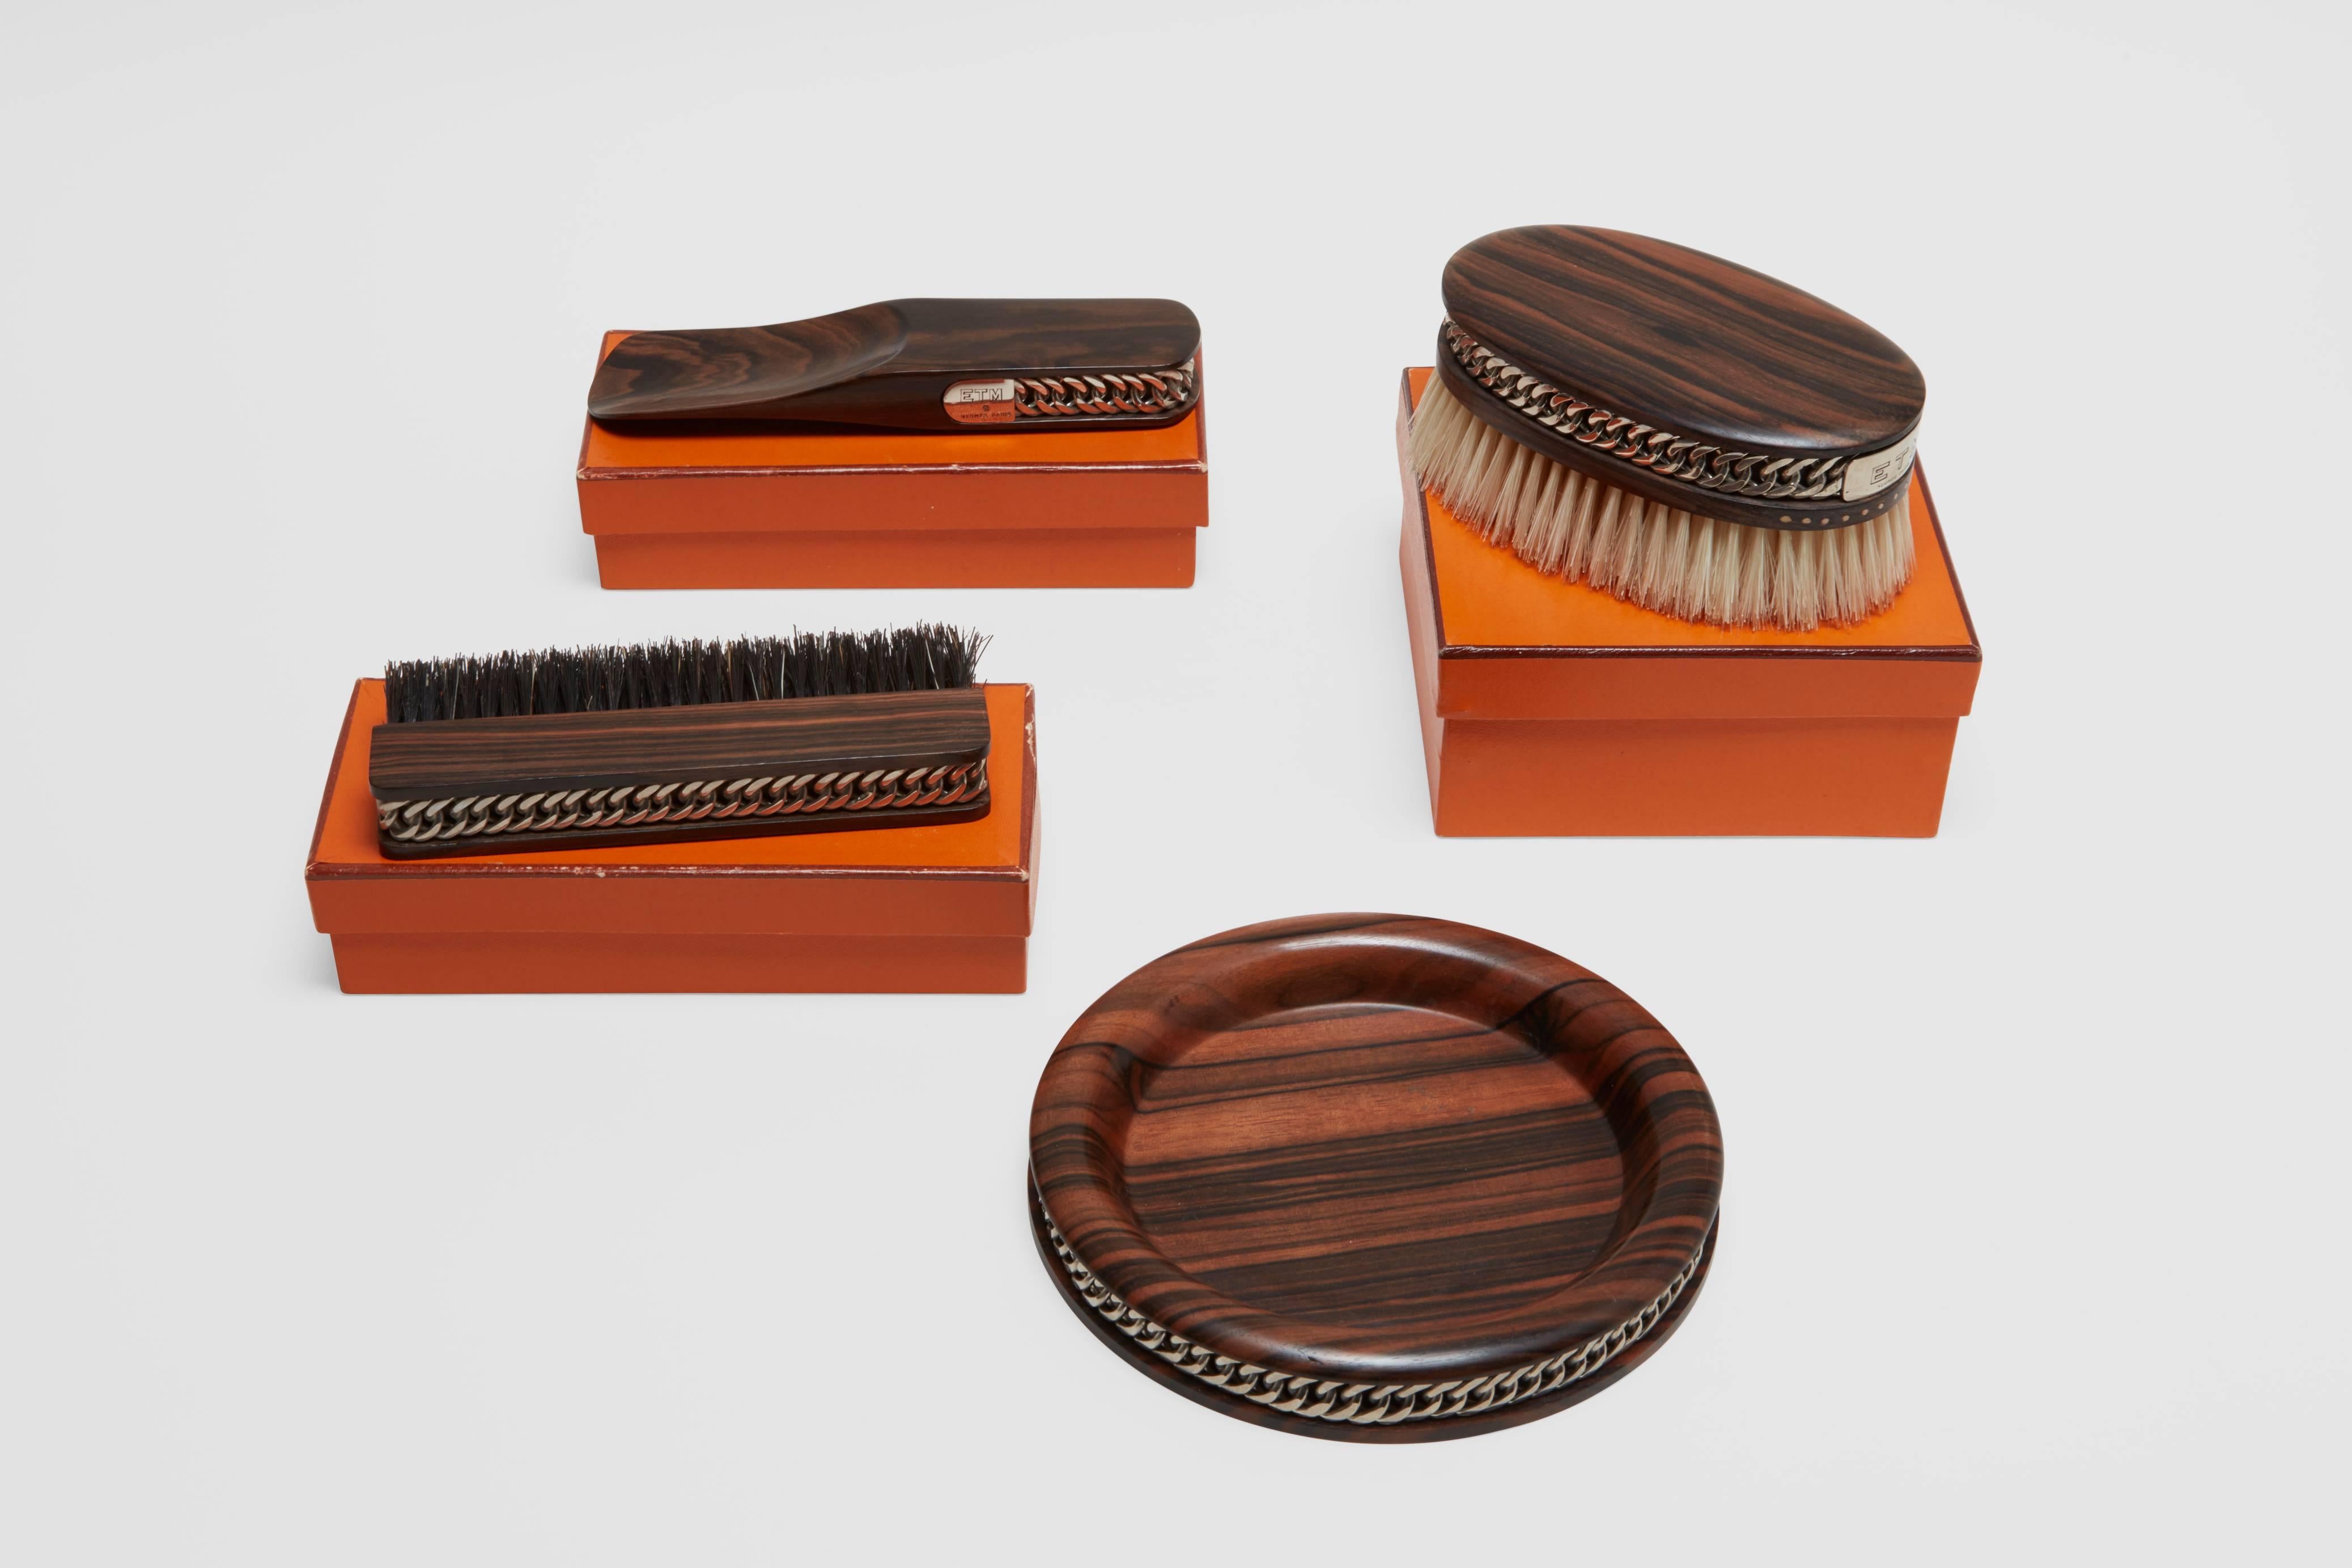 A banded Macassar ebony wood and silver plated brass set of gentleman's dressing table accessories. This set is one of the finest ever made, and was design by one of the most sought after designers in the world; Paul Dupré-Lafon.

This set was